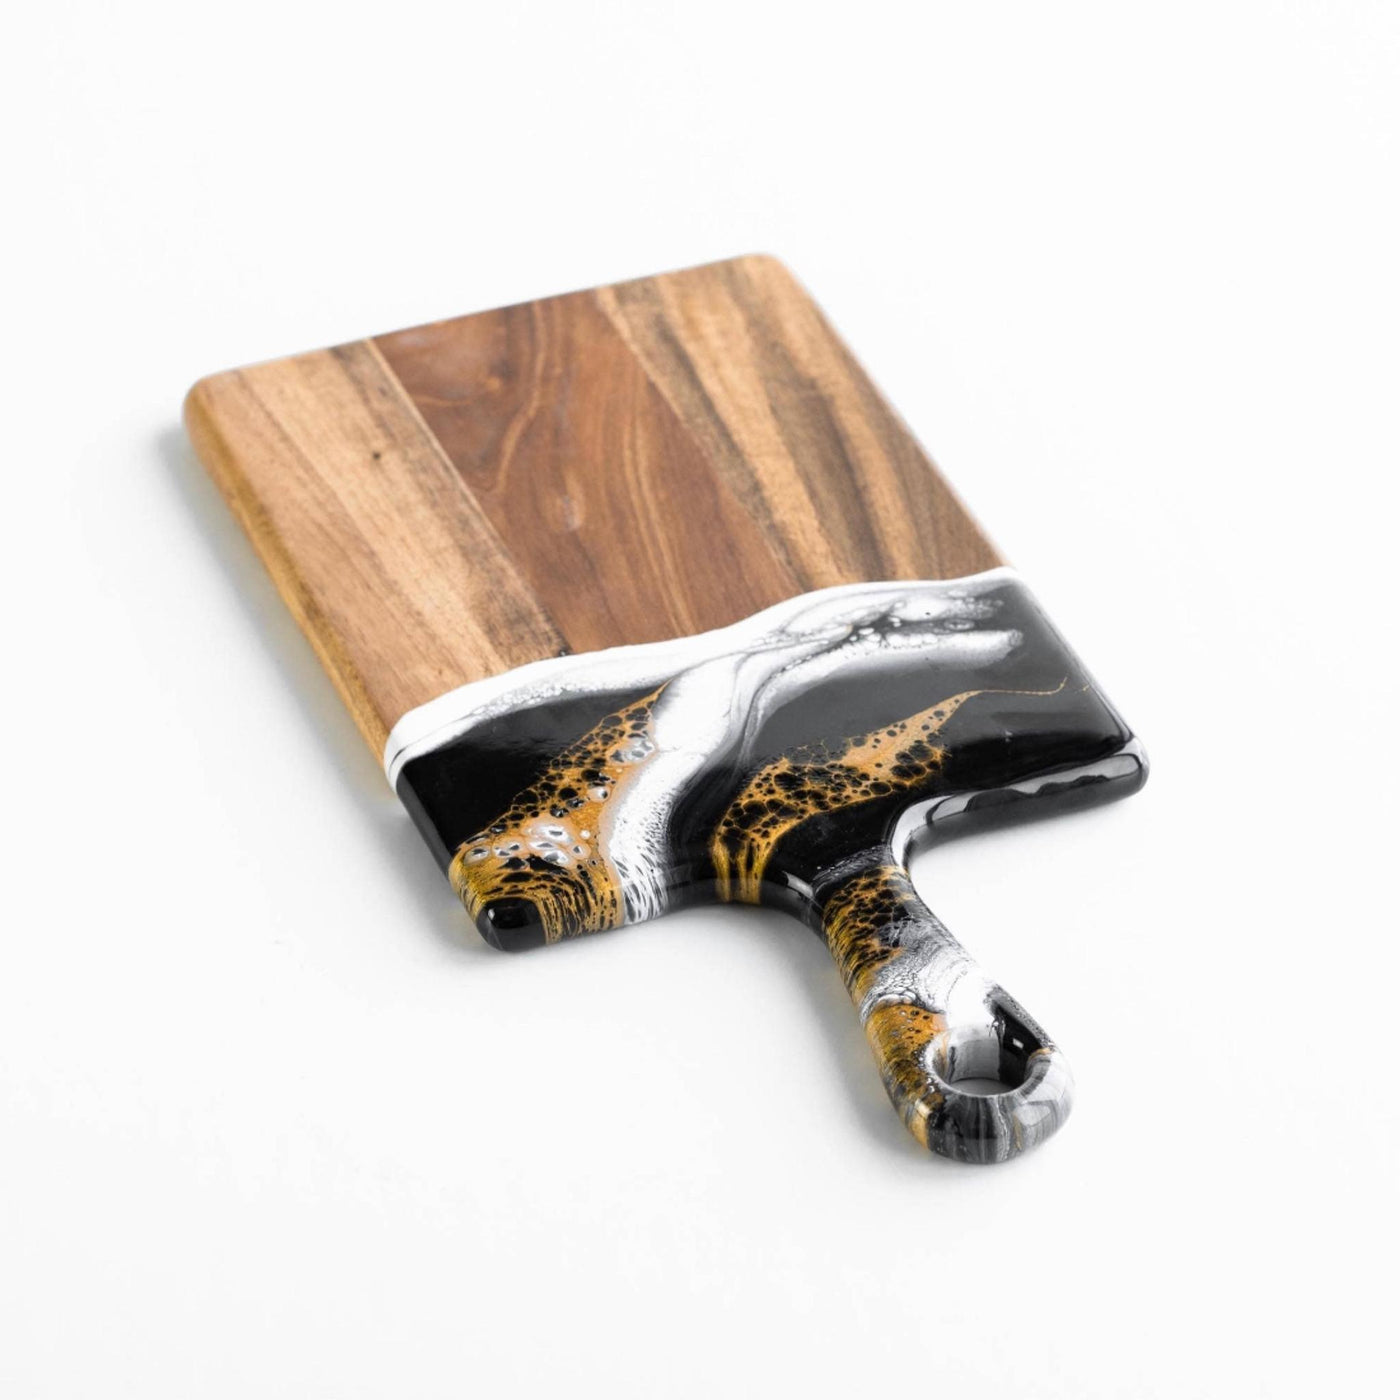 Acacia Resin Cheeseboards: Black/White/Gold - Small 7"x14" - Set With Style